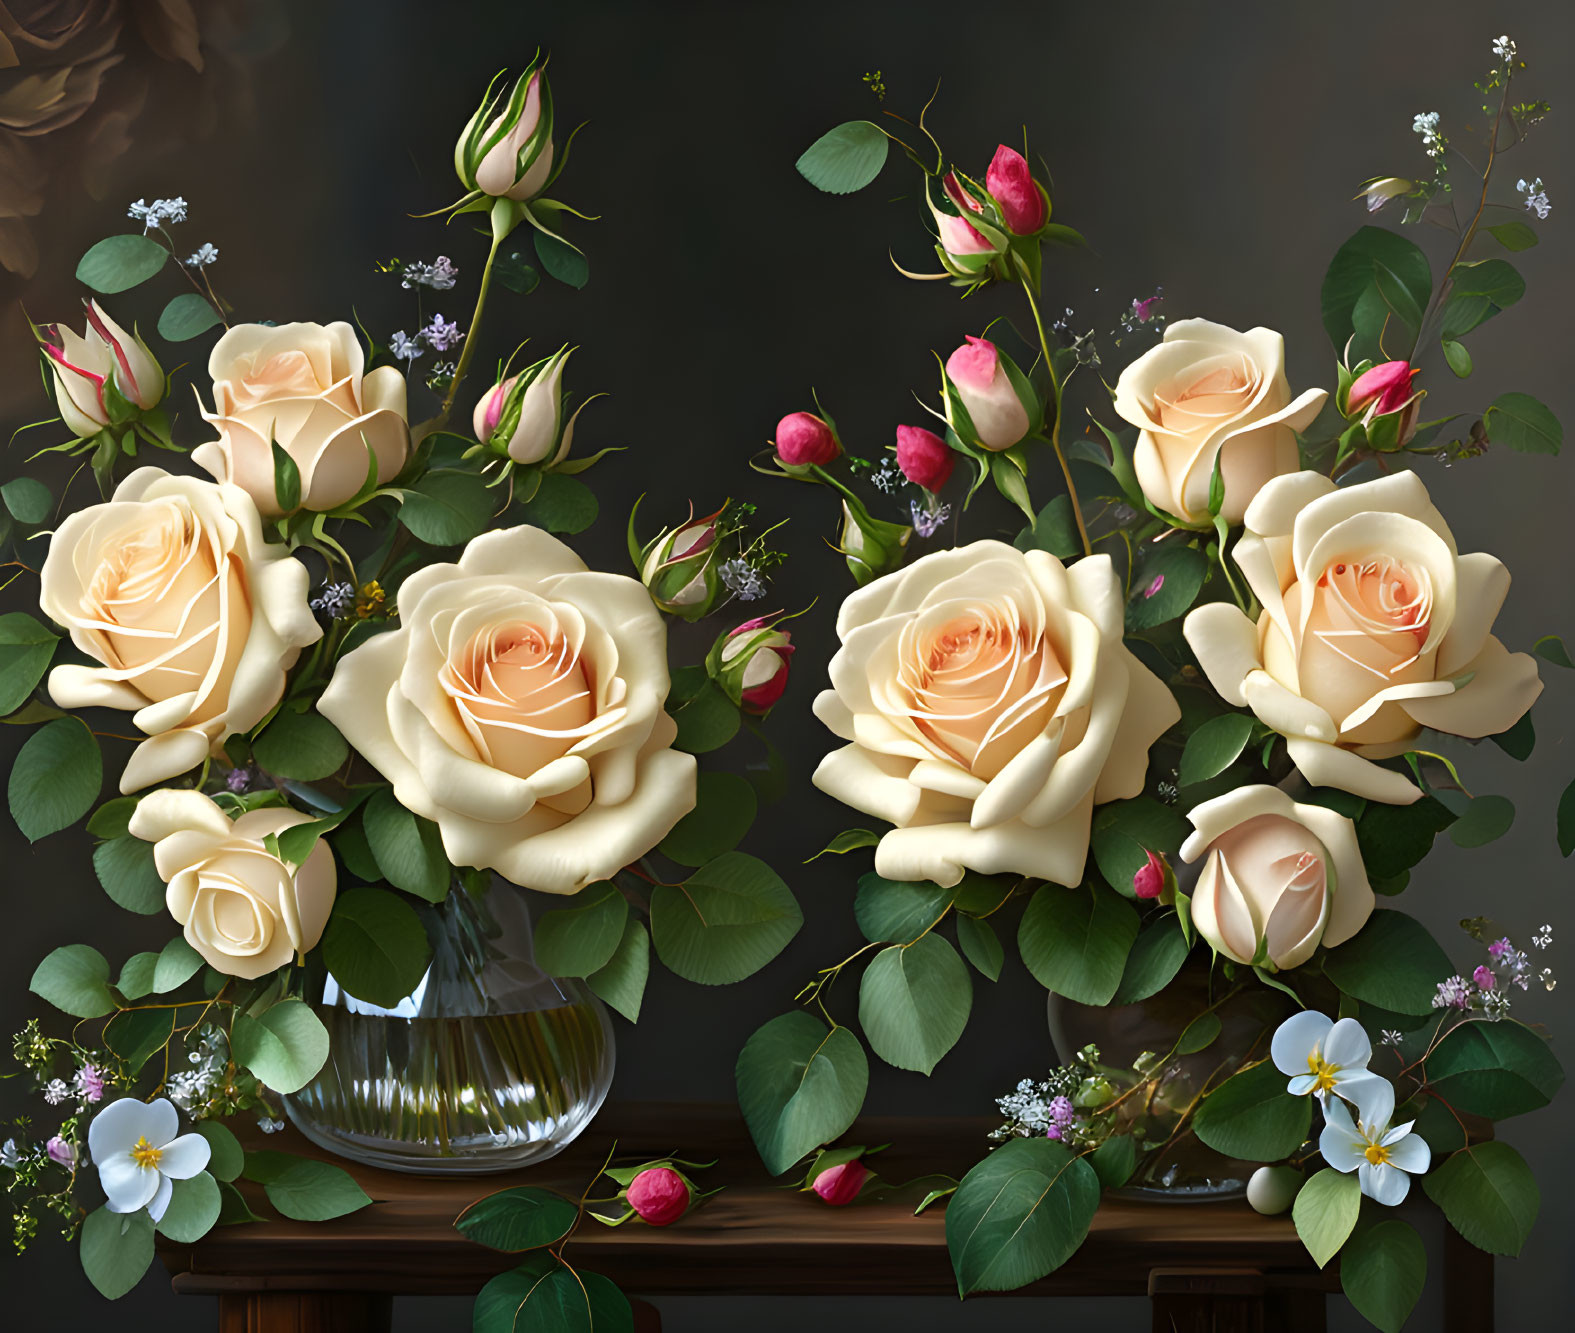 Beautiful roses, milky color, connected with mergi